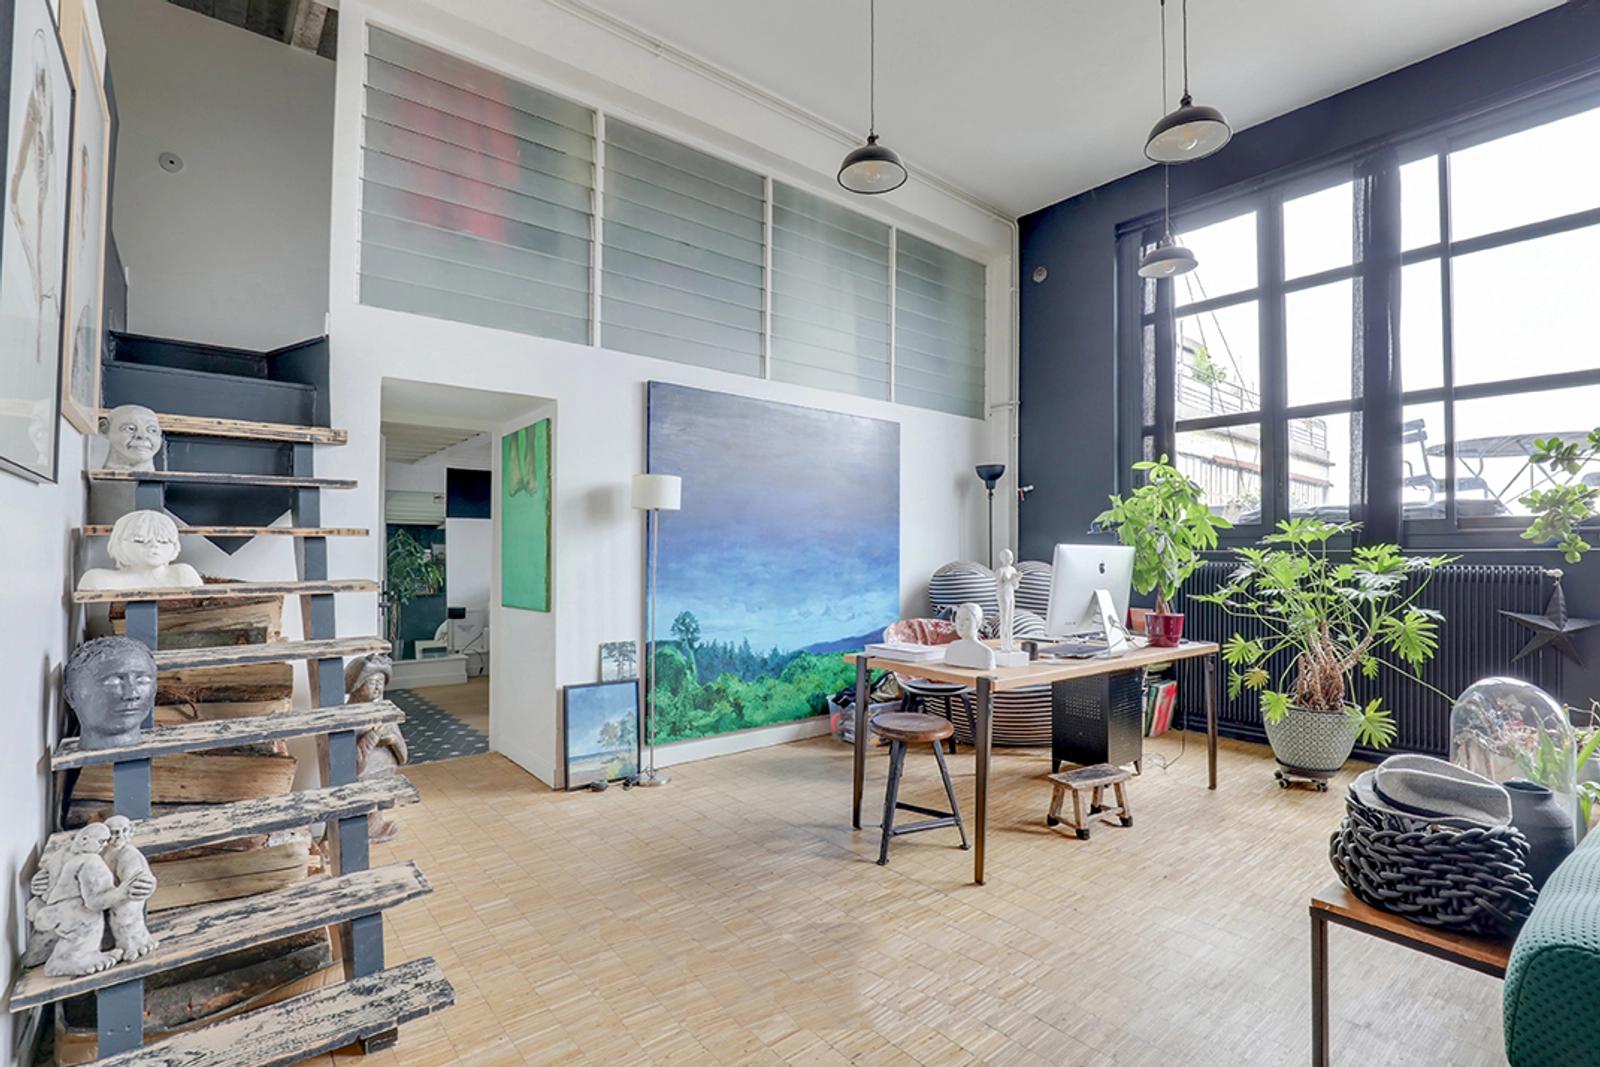 Space Spacious and bright arty loft, New York style - 3